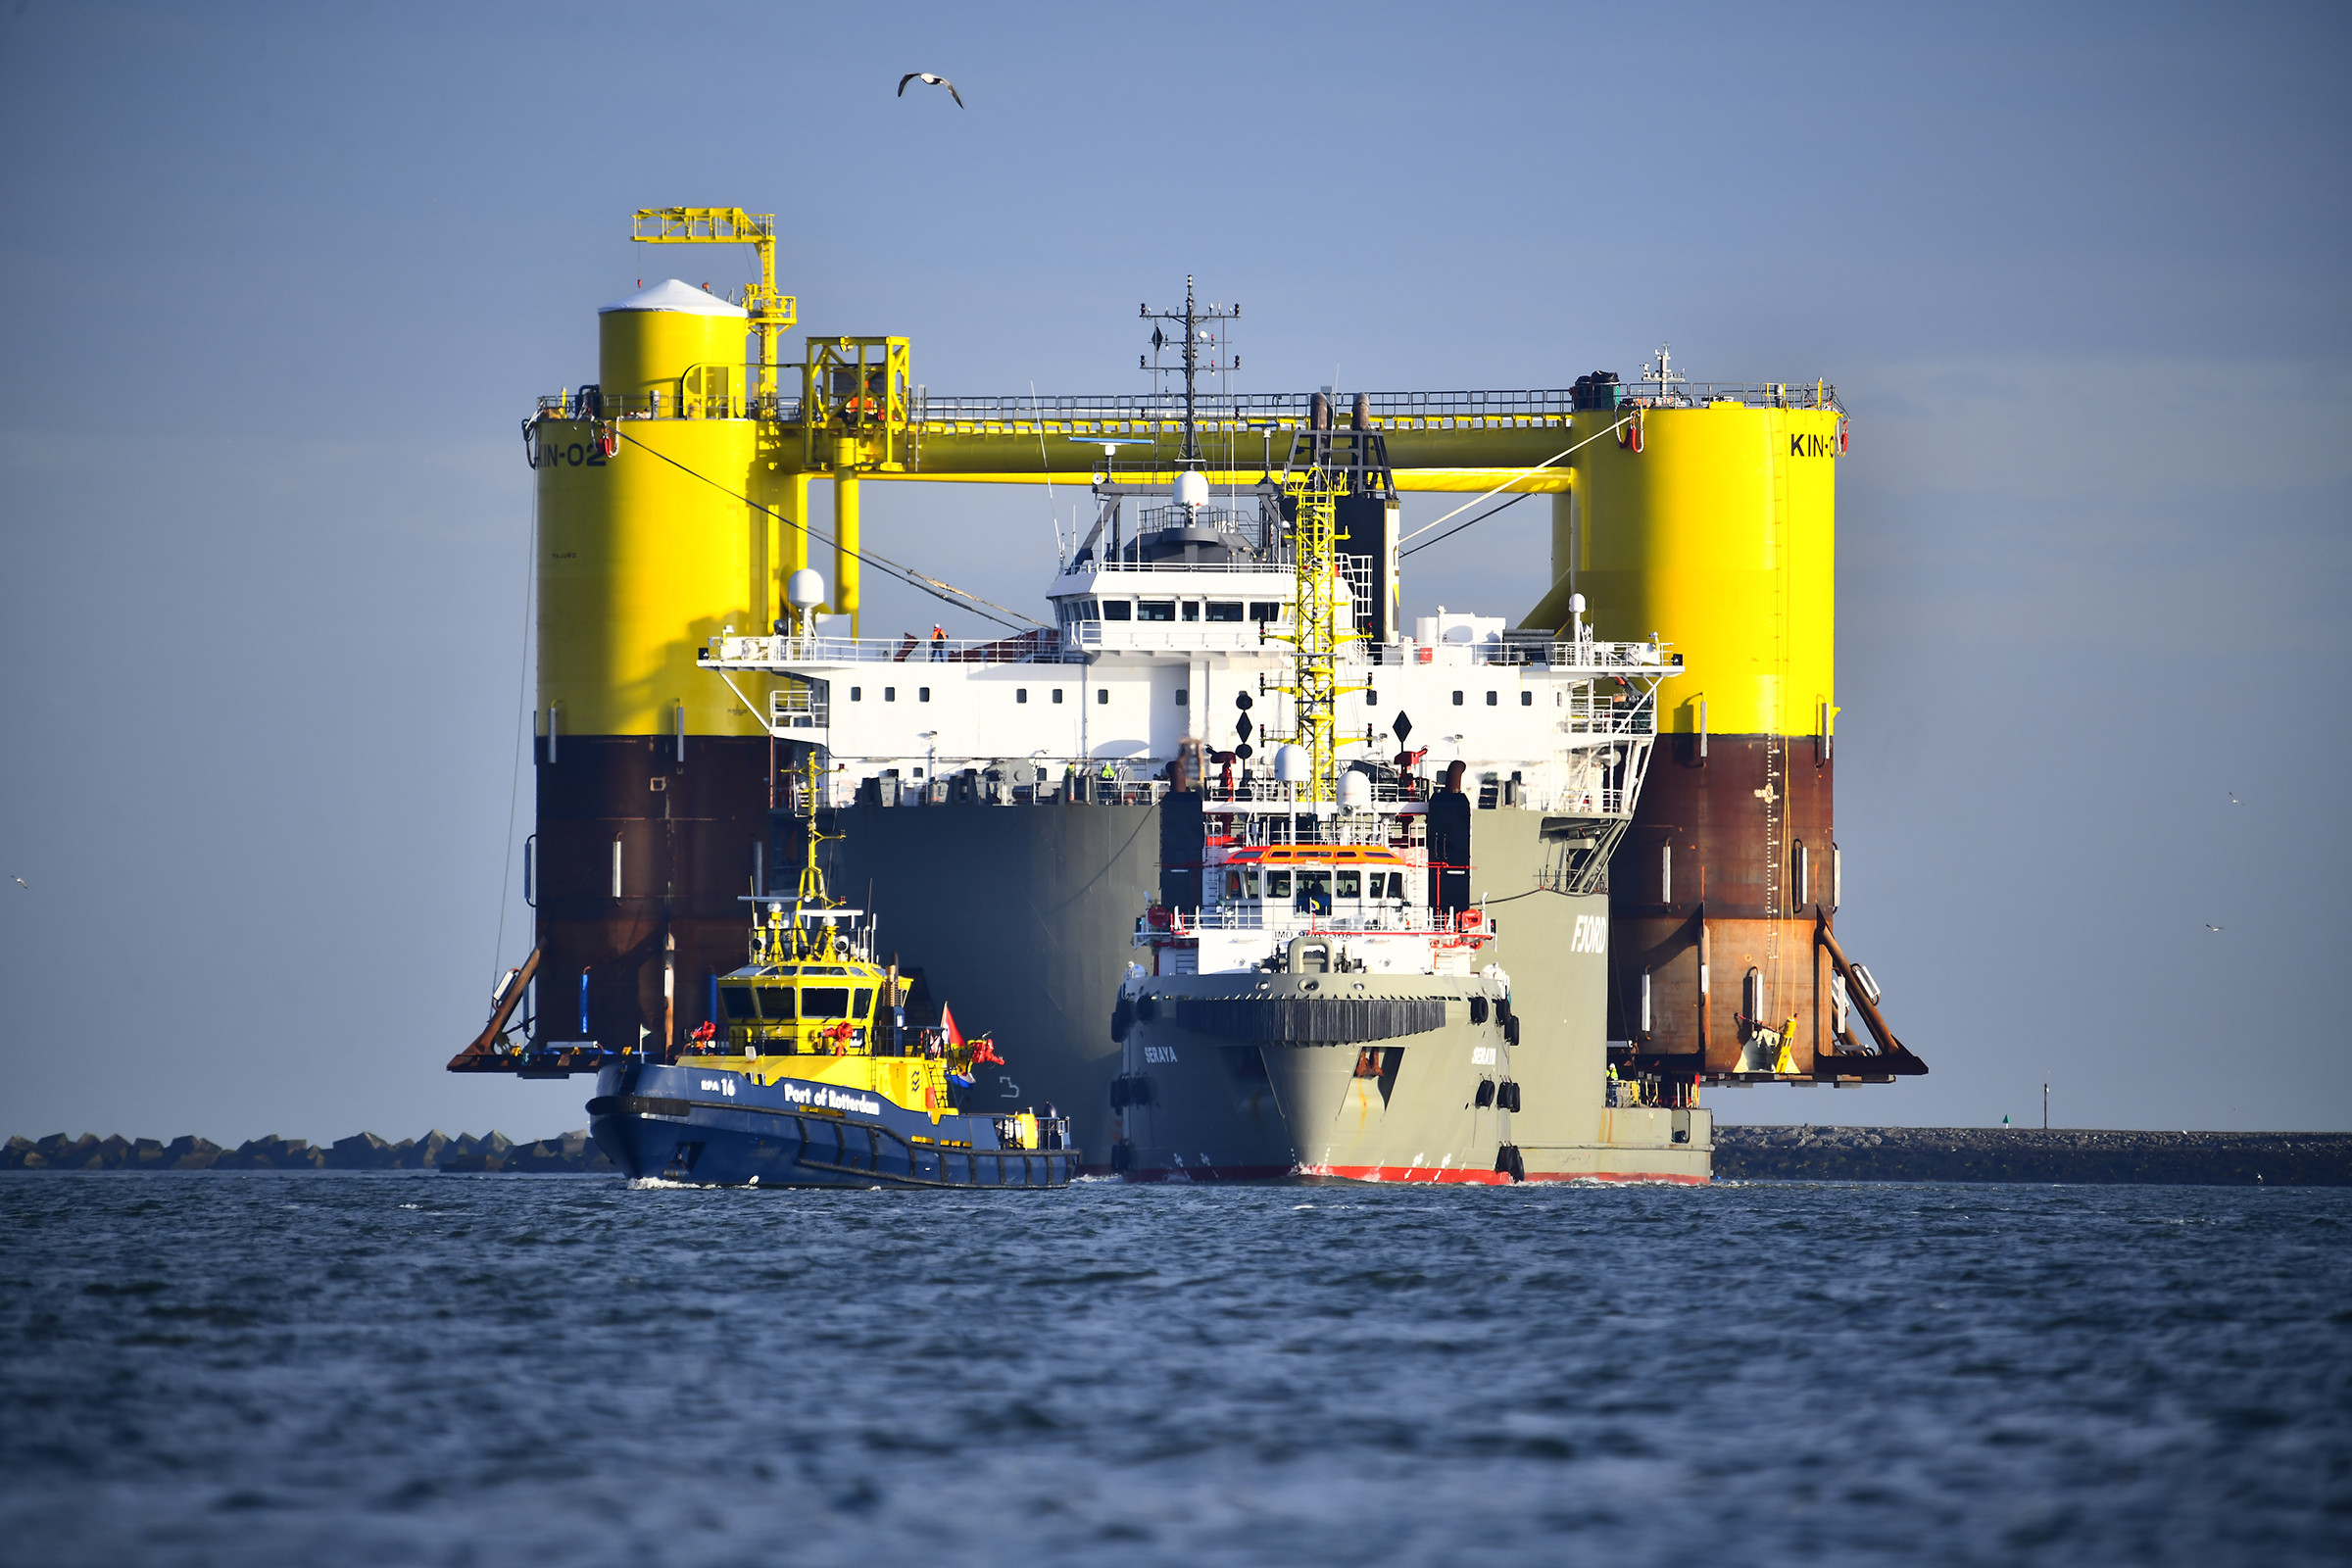 Towed by the anchor handler Seraya, Boskalis’ semi-submersible barge Fjord carrying a floater arrives in the port of Rotterdam